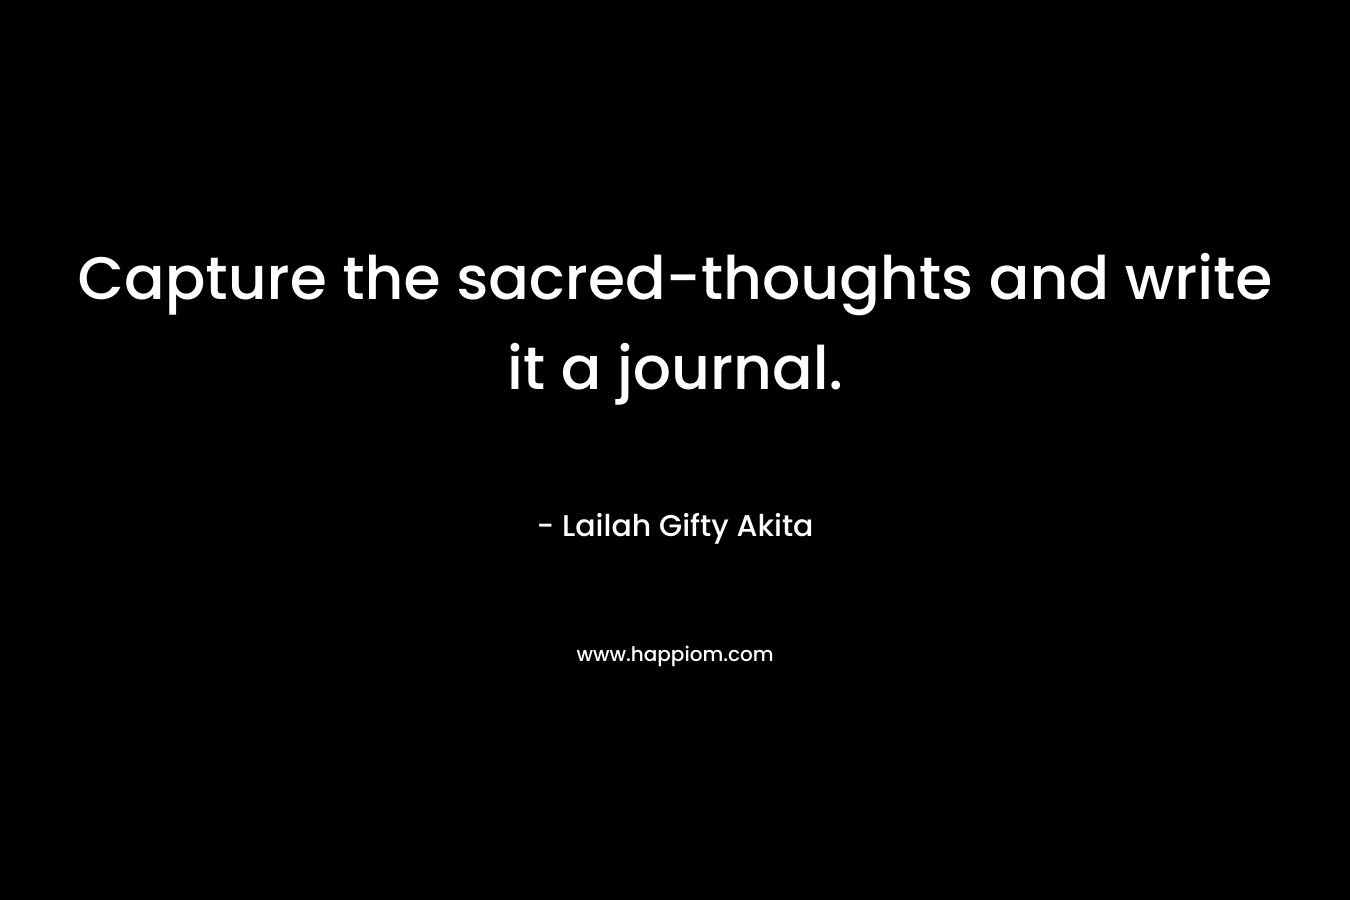 Capture the sacred-thoughts and write it a journal. – Lailah Gifty Akita